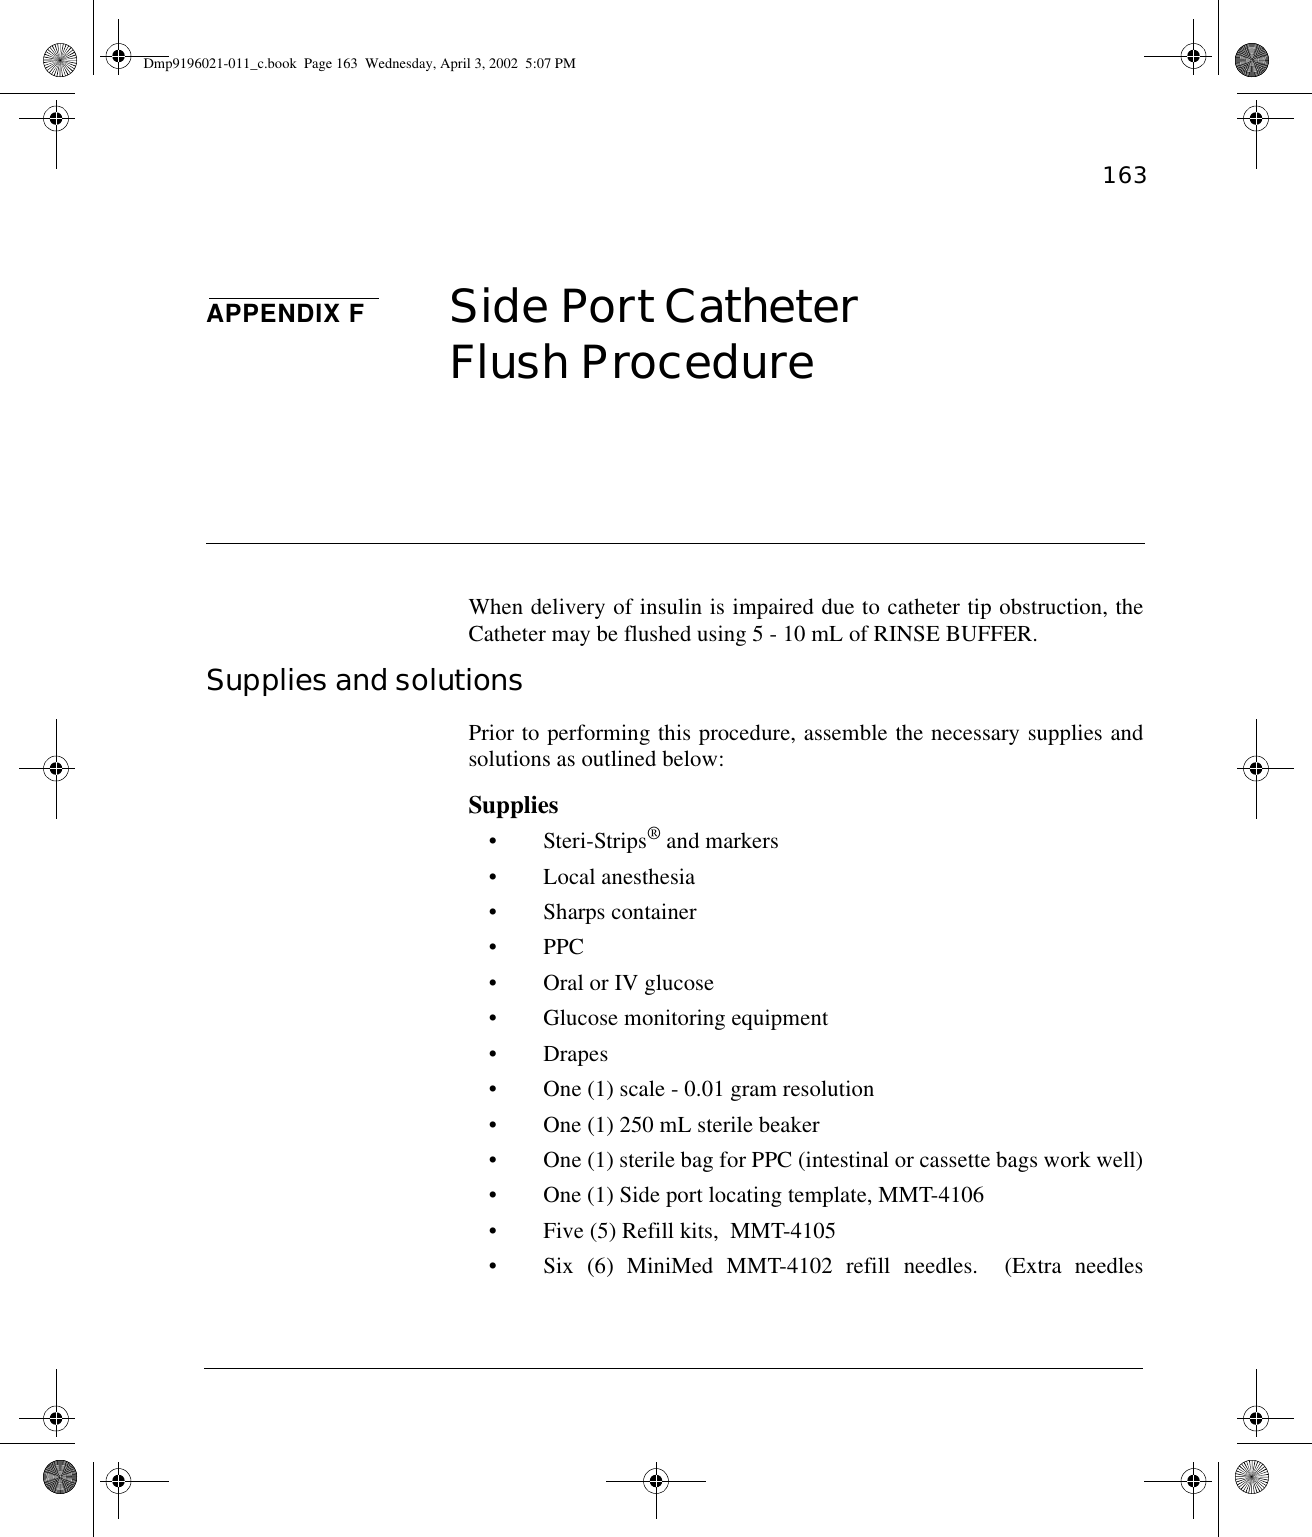 163APPENDIX F Side Port CatheterFlush Procedure When delivery of insulin is impaired due to catheter tip obstruction, theCatheter may be flushed using 5 - 10 mL of RINSE BUFFER. Supplies and solutions Prior to performing this procedure, assemble the necessary supplies andsolutions as outlined below:Supplies• Steri-Strips® and markers • Local anesthesia• Sharps container• PPC• Oral or IV glucose• Glucose monitoring equipment•Drapes• One (1) scale - 0.01 gram resolution• One (1) 250 mL sterile beaker• One (1) sterile bag for PPC (intestinal or cassette bags work well)• One (1) Side port locating template, MMT-4106• Five (5) Refill kits,  MMT-4105• Six (6) MiniMed MMT-4102 refill needles.  (Extra needlesDmp9196021-011_c.book  Page 163  Wednesday, April 3, 2002  5:07 PM